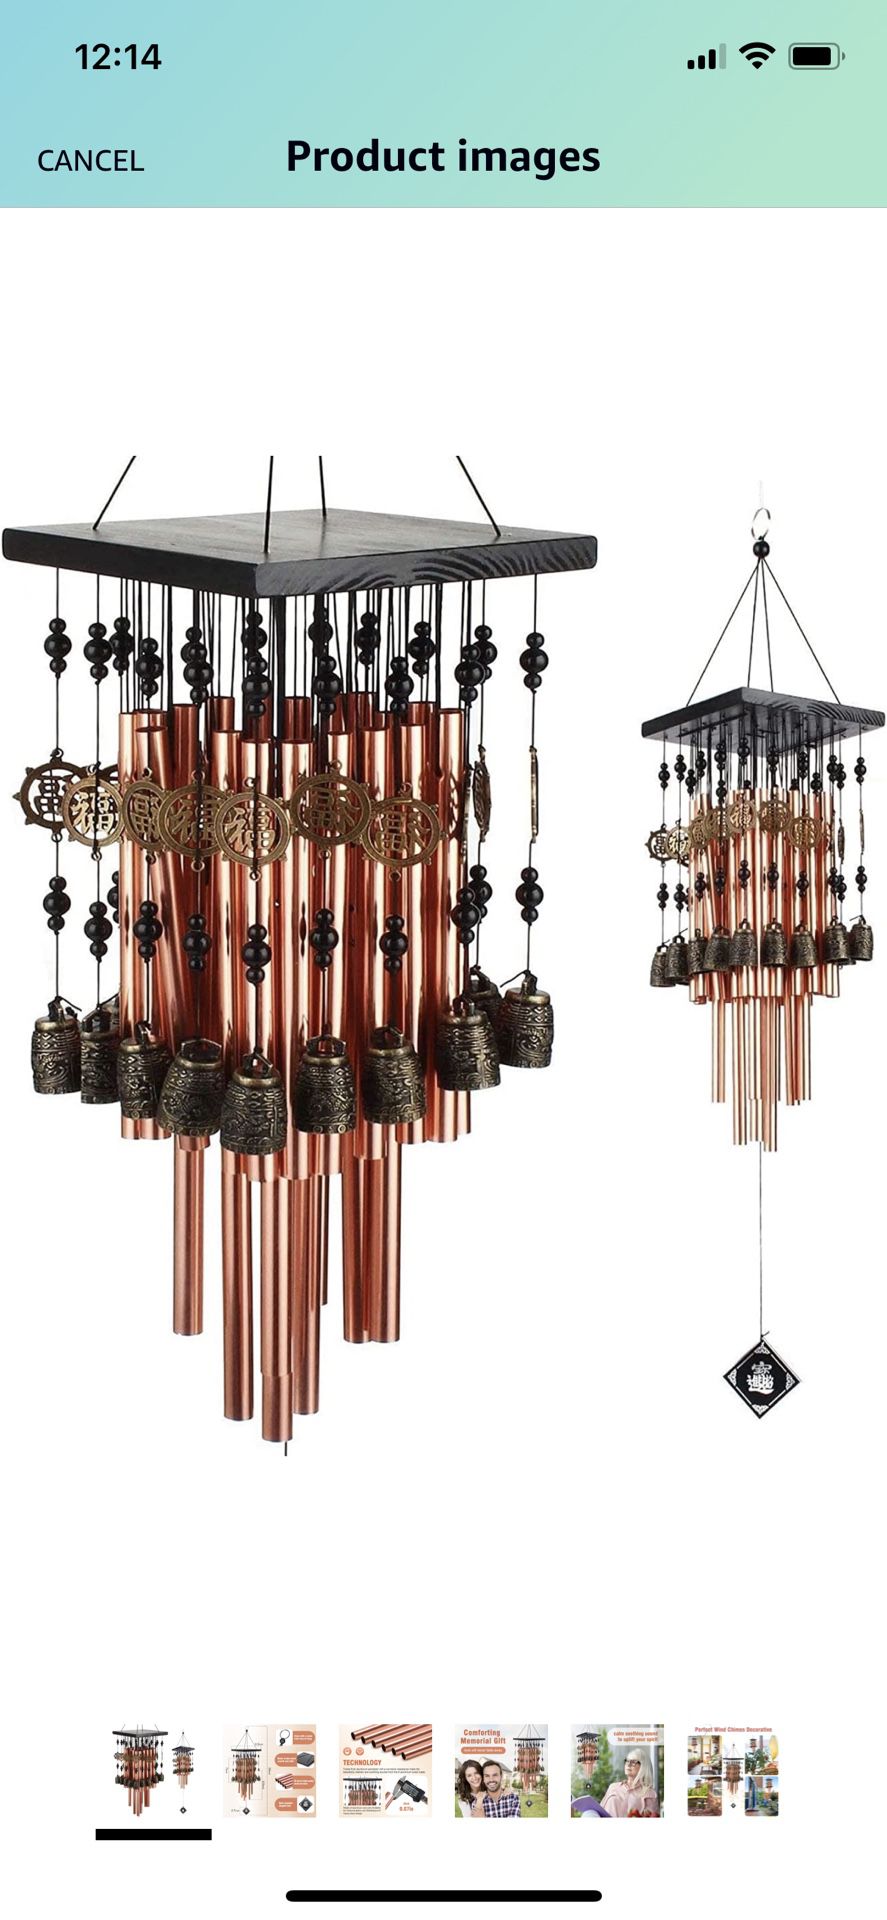 Wind Chimes for Outside,30"Memorial Wind Chimes with 28 pieces Tubes and 16 Copper Bell for Garden,Patio,Window Wind Chime Hanging Decoration, Bronze 